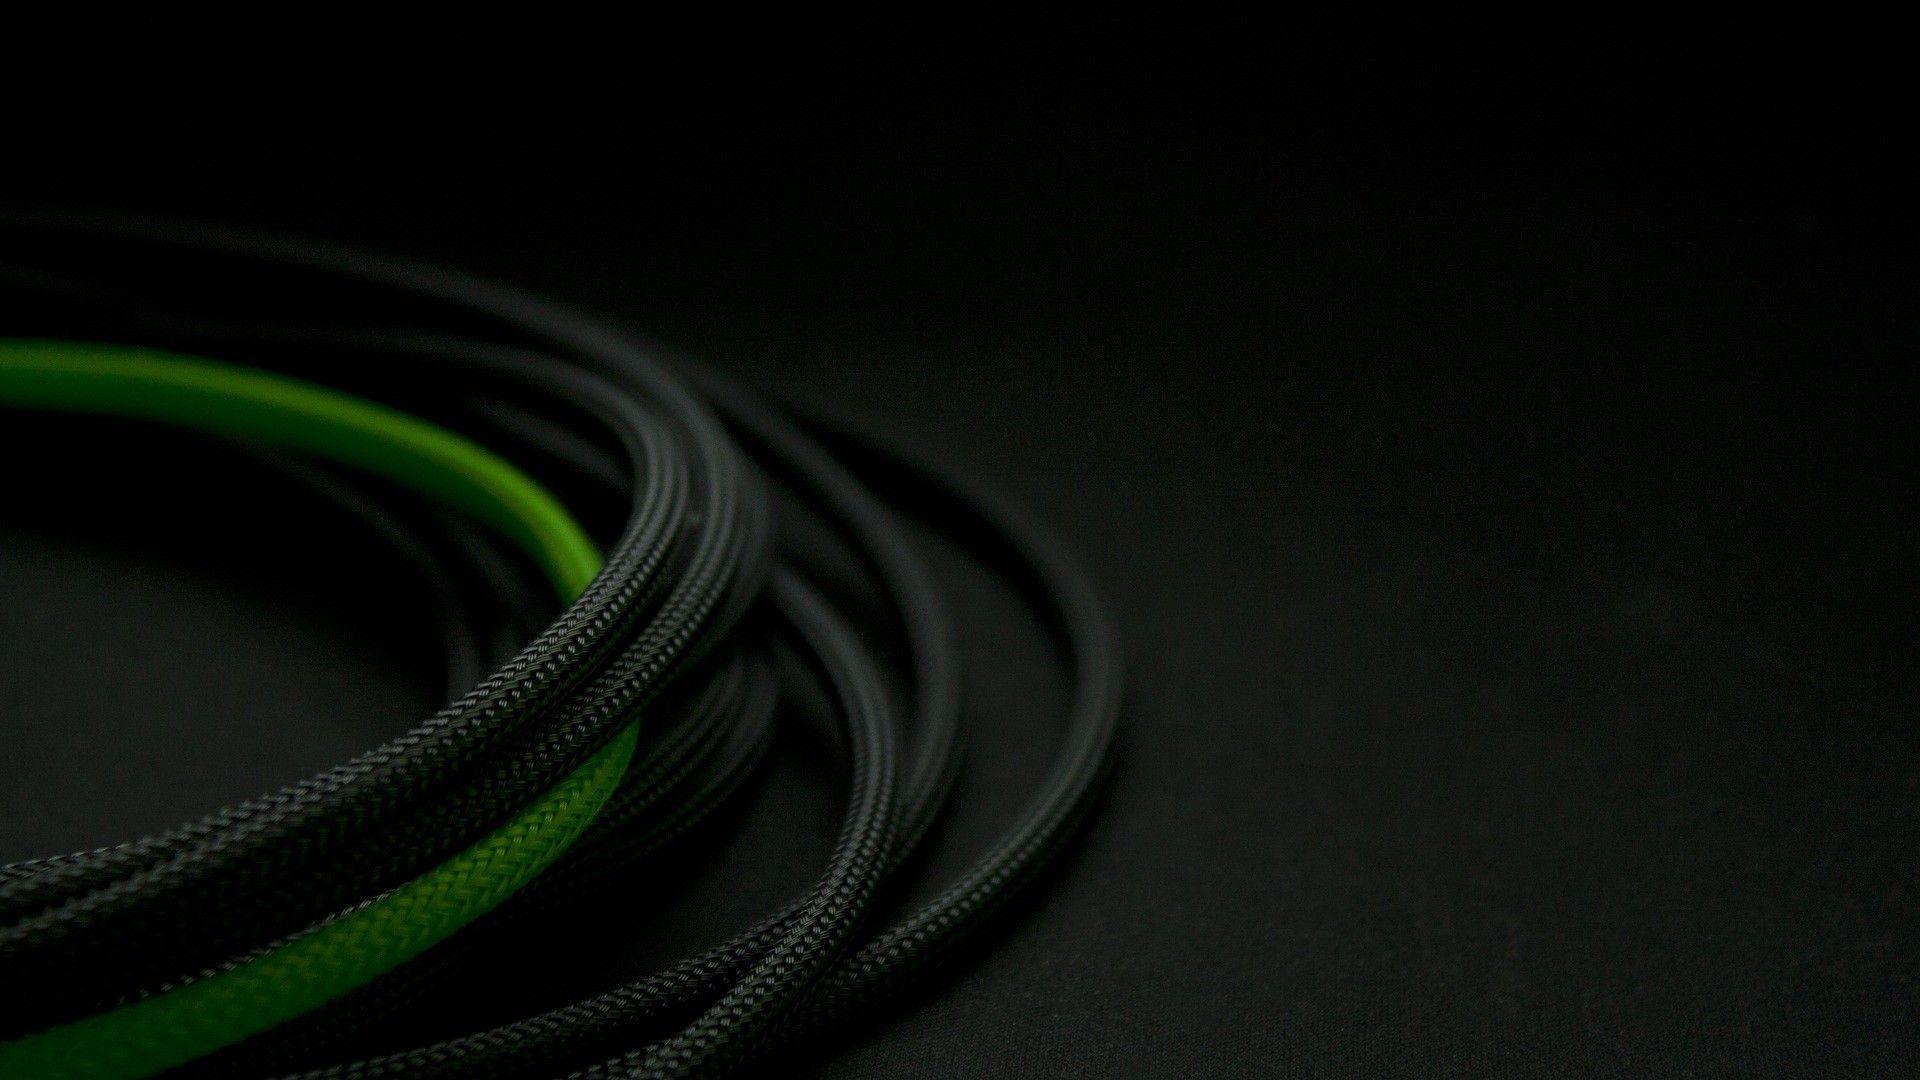 Wallpaper For > Black And Green Background Wallpaper